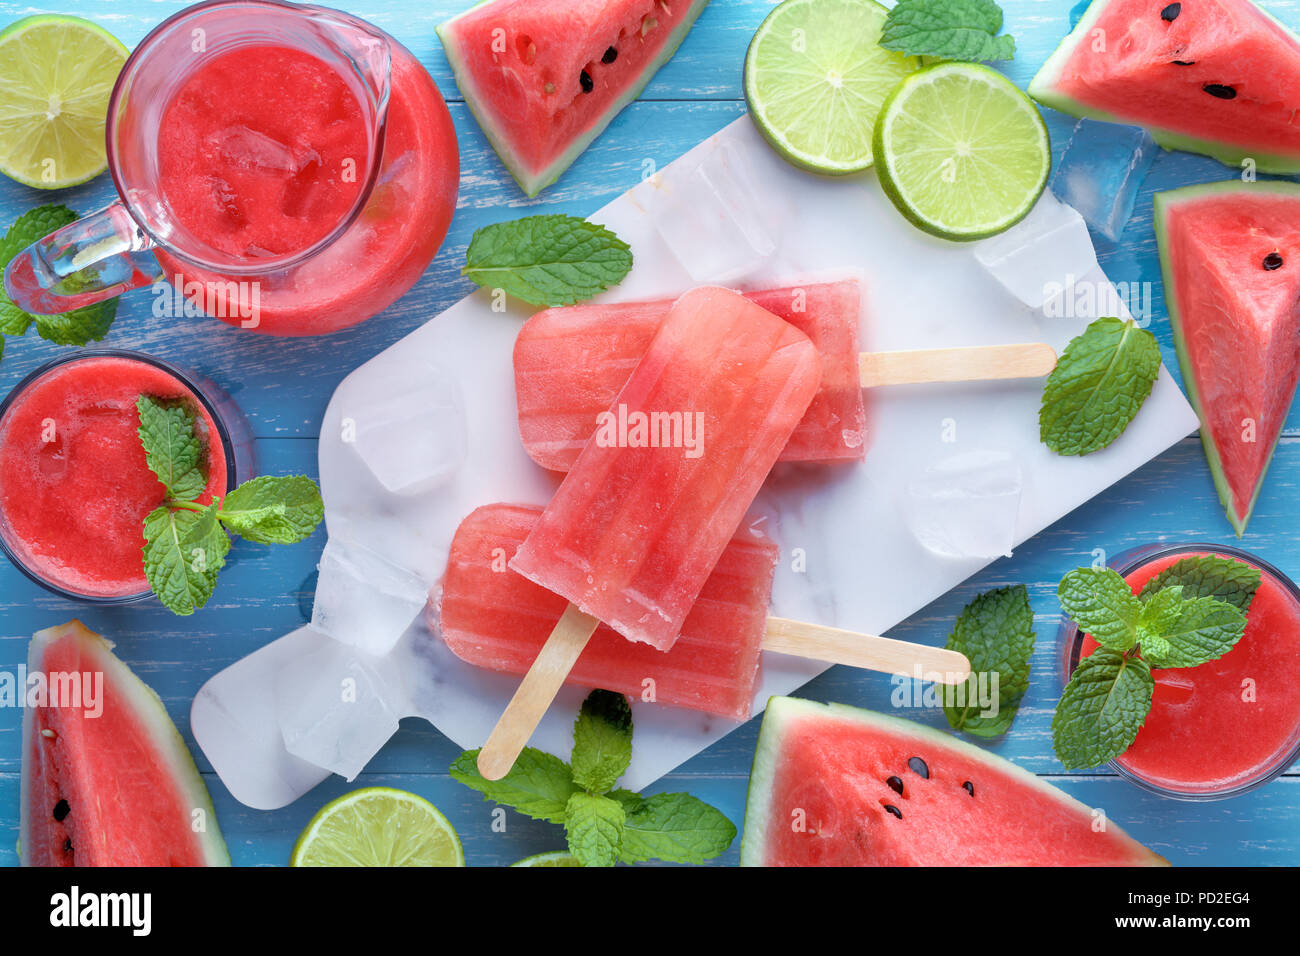 Watermelon,slices of lemon and watermelon juice on table Stock Photo